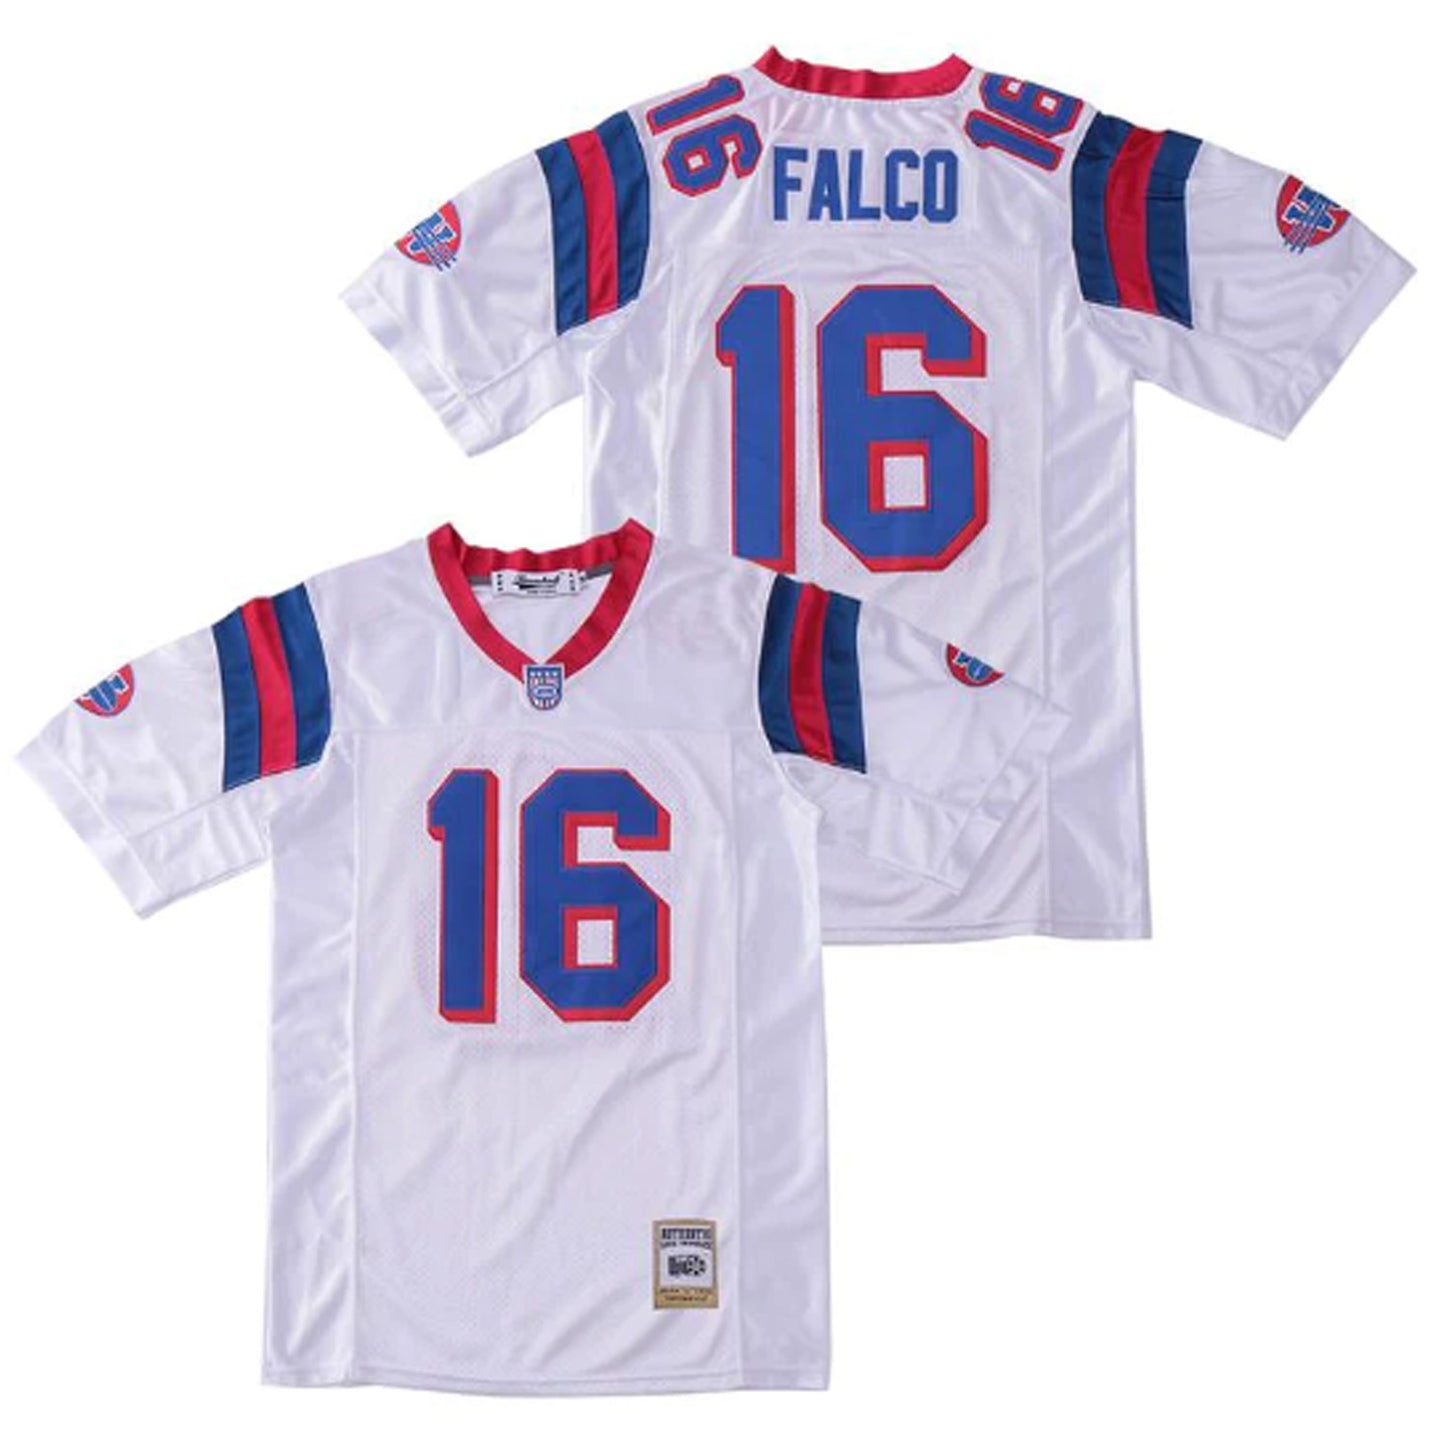 Keanu Reeves 'Falco' the Replacements Football 16 Jersey